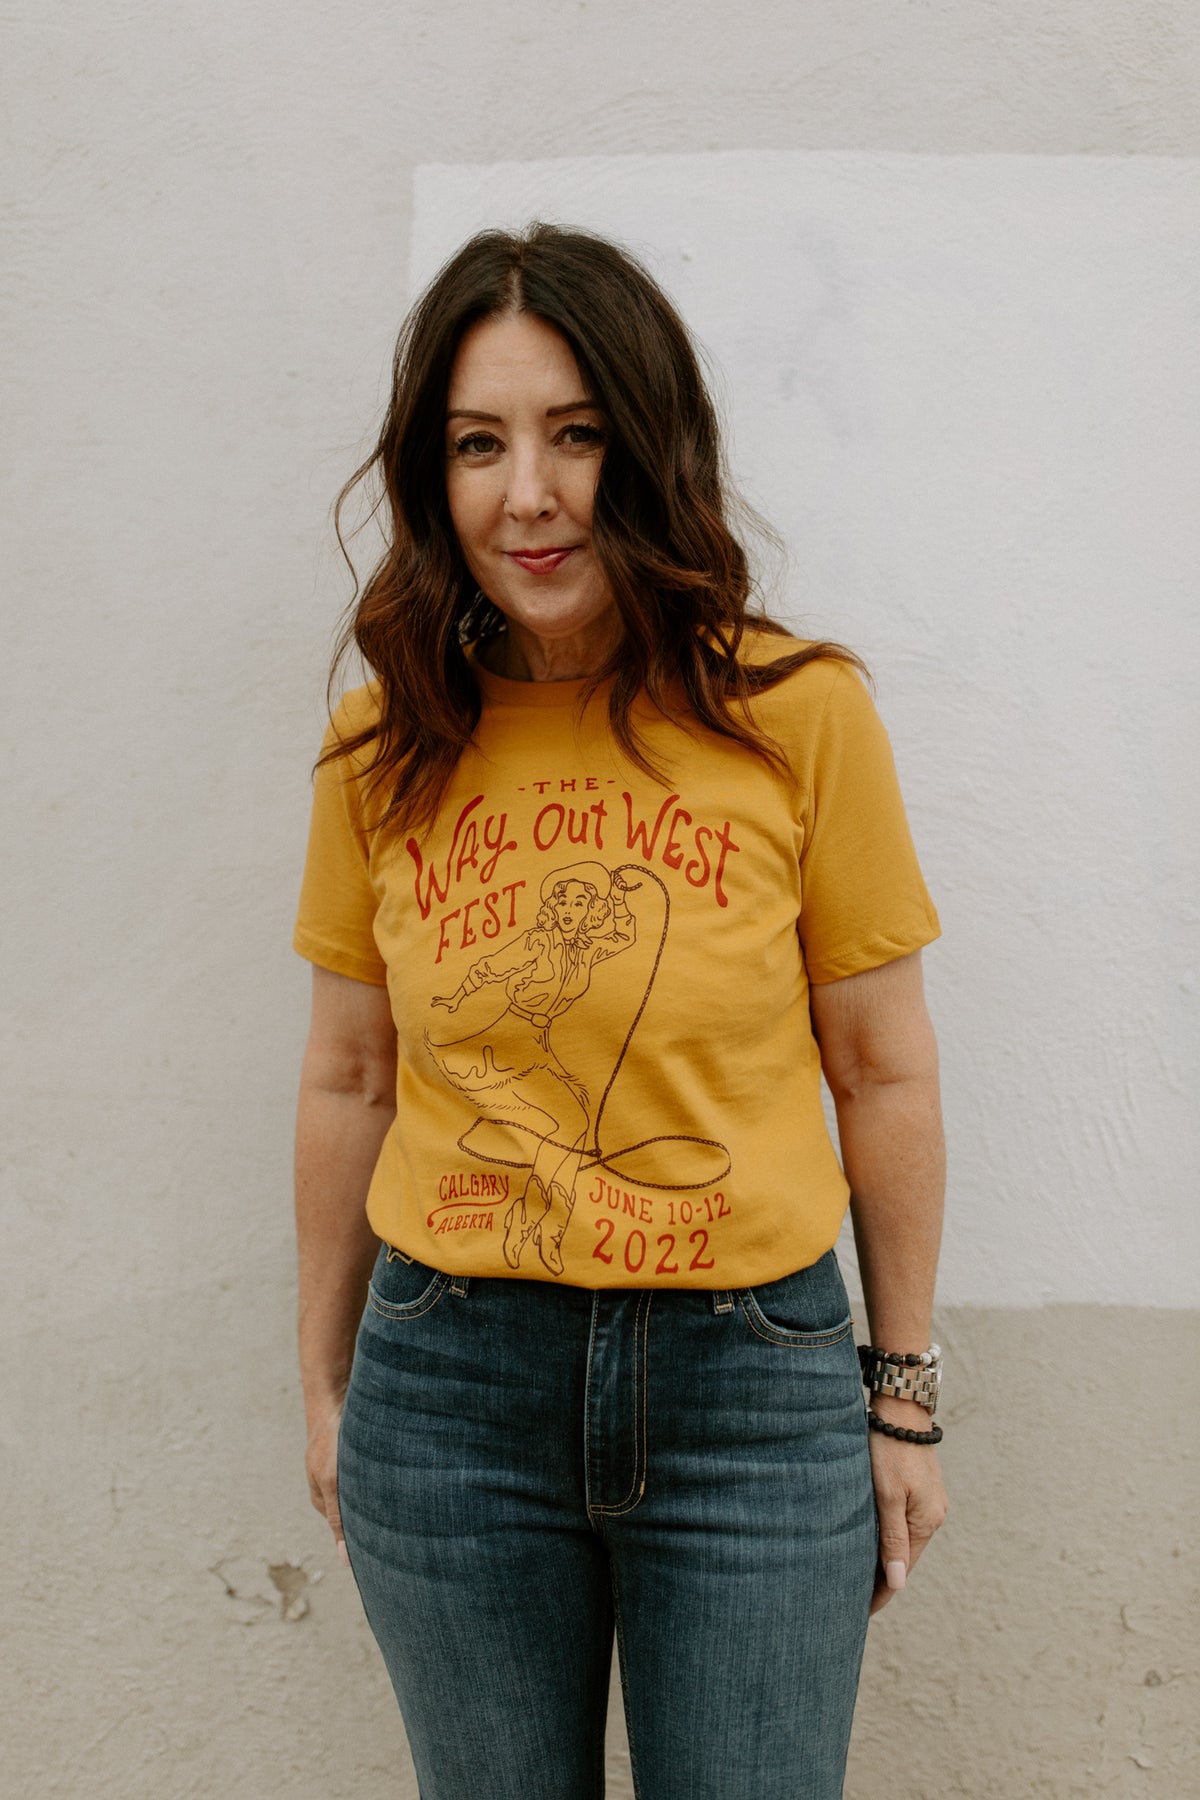 Way Out West Fest Women&#39;s Tee (2022)